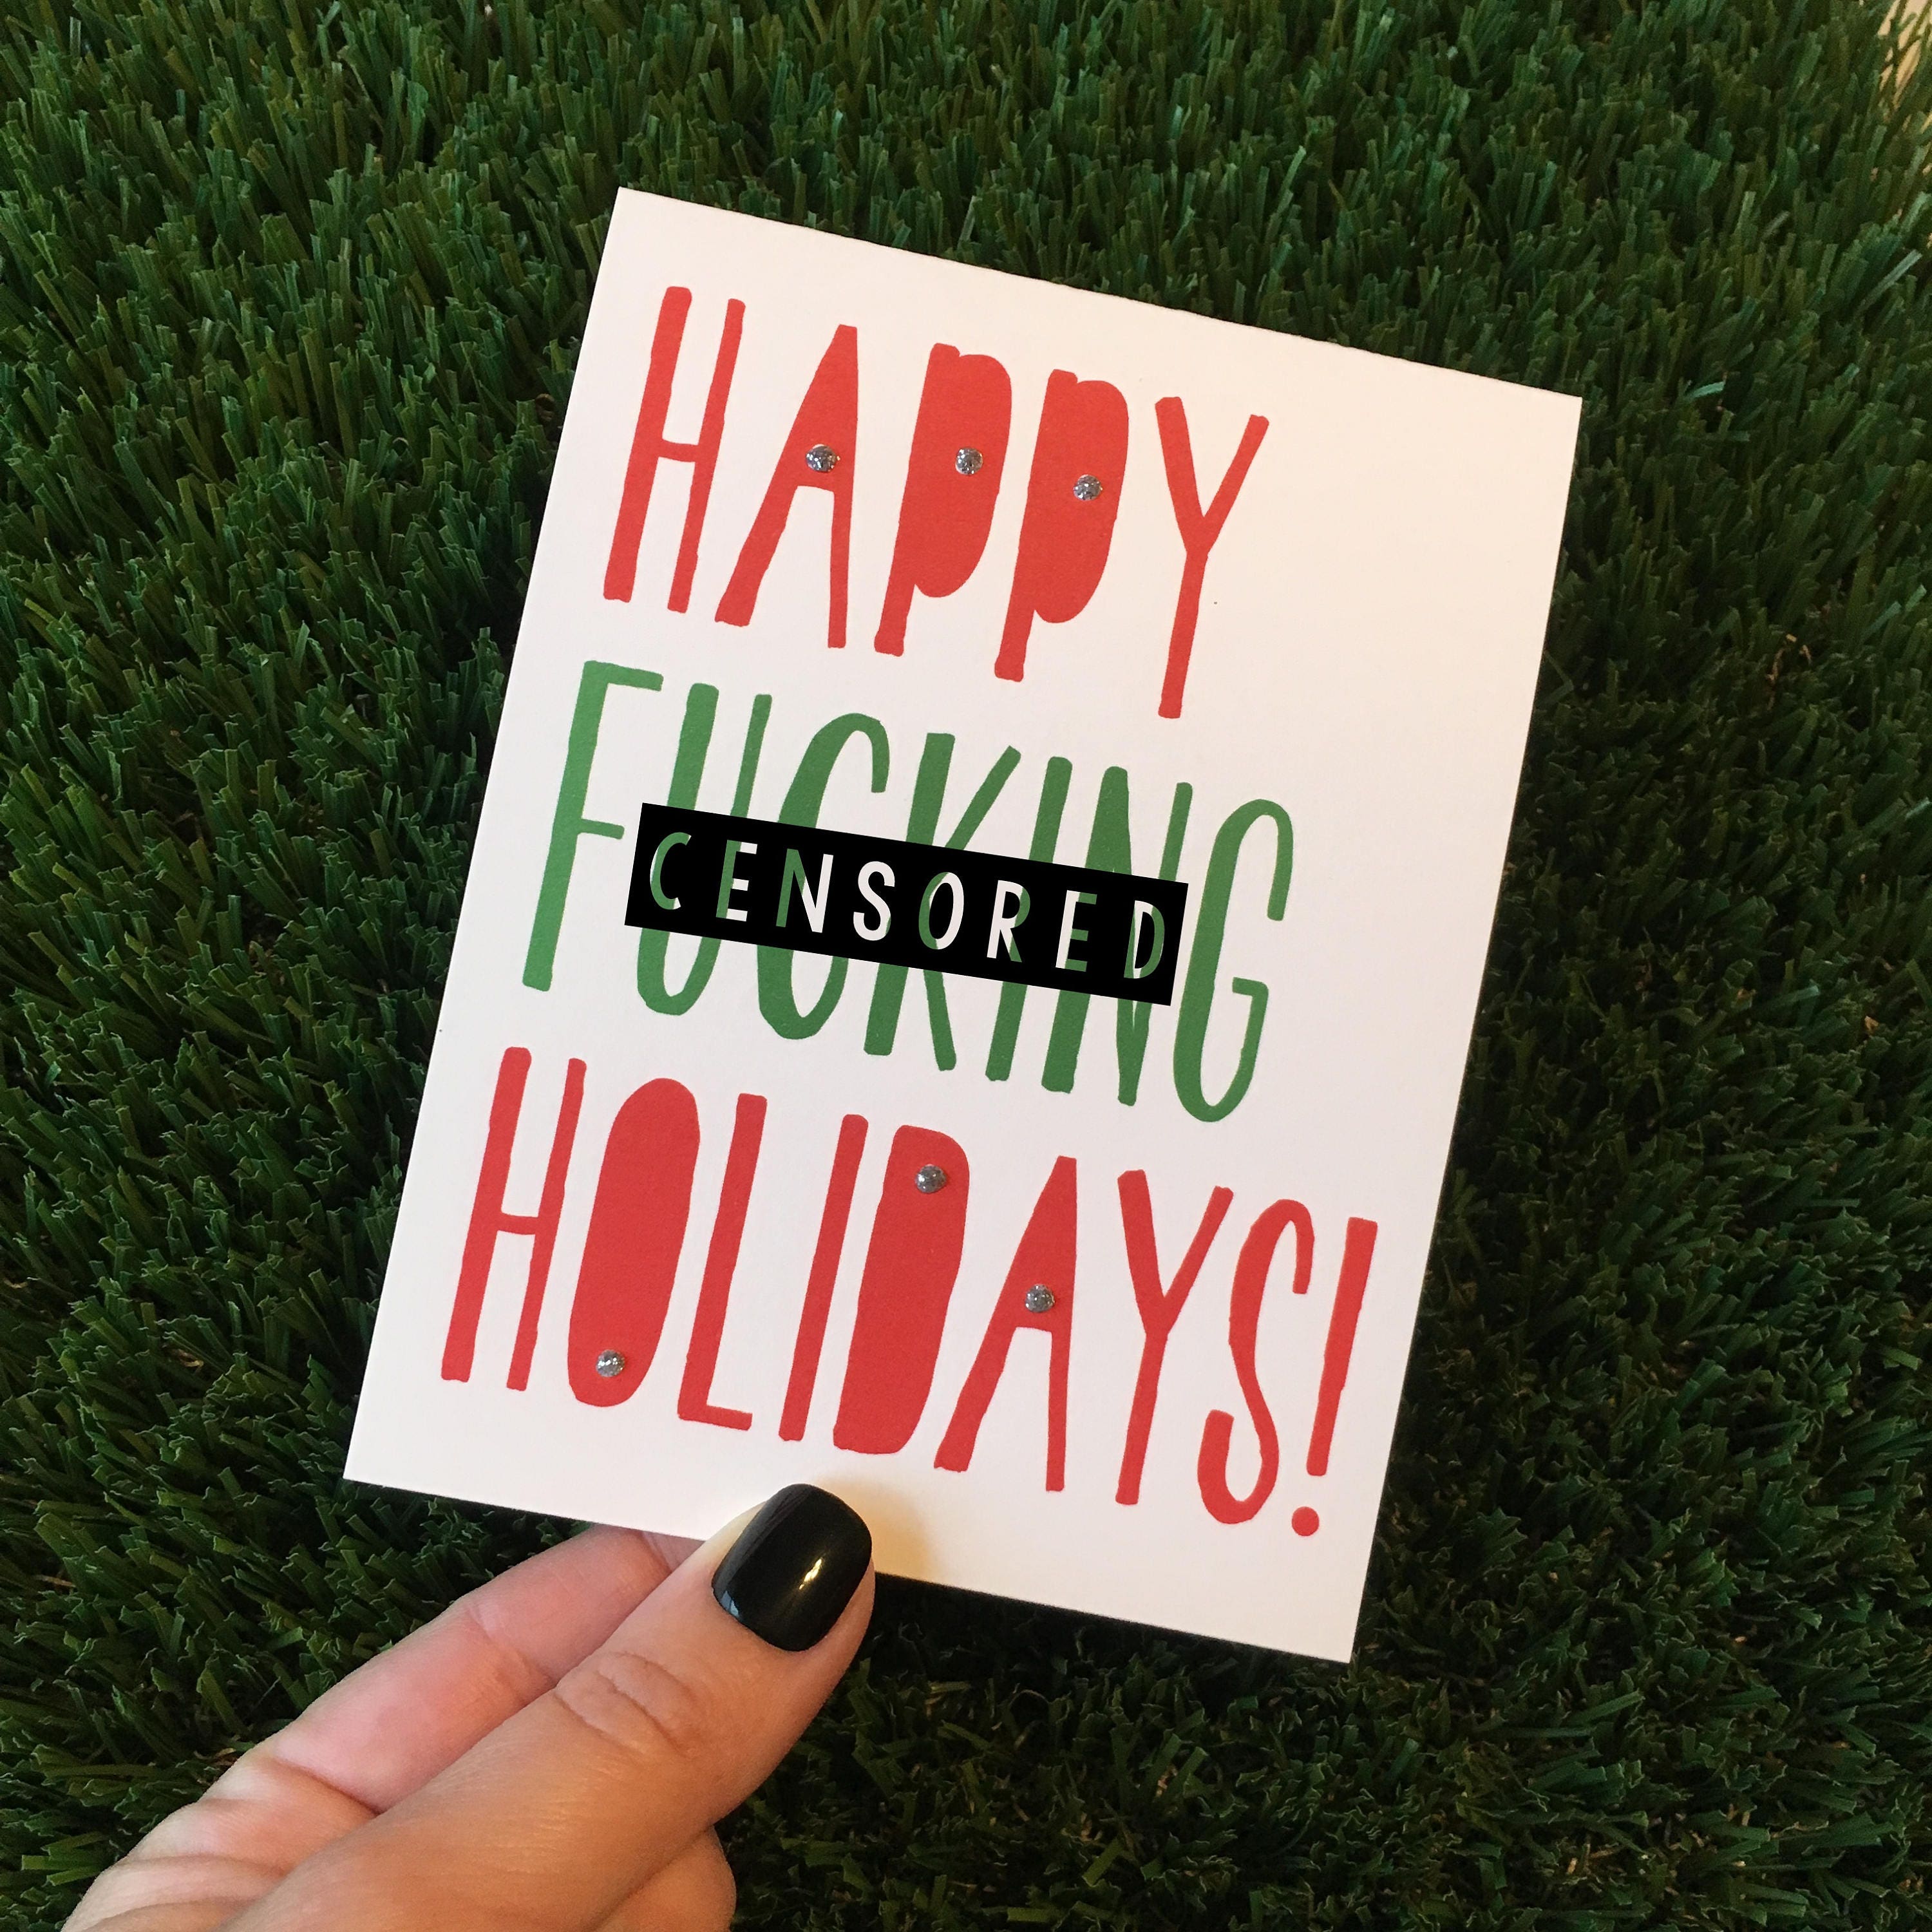 Funny Holiday Card / Funny xmas Card / Inappropriate Holiday Card / Rude Christmas Card / Offensive Christmas Card / Naughty Christmas Card